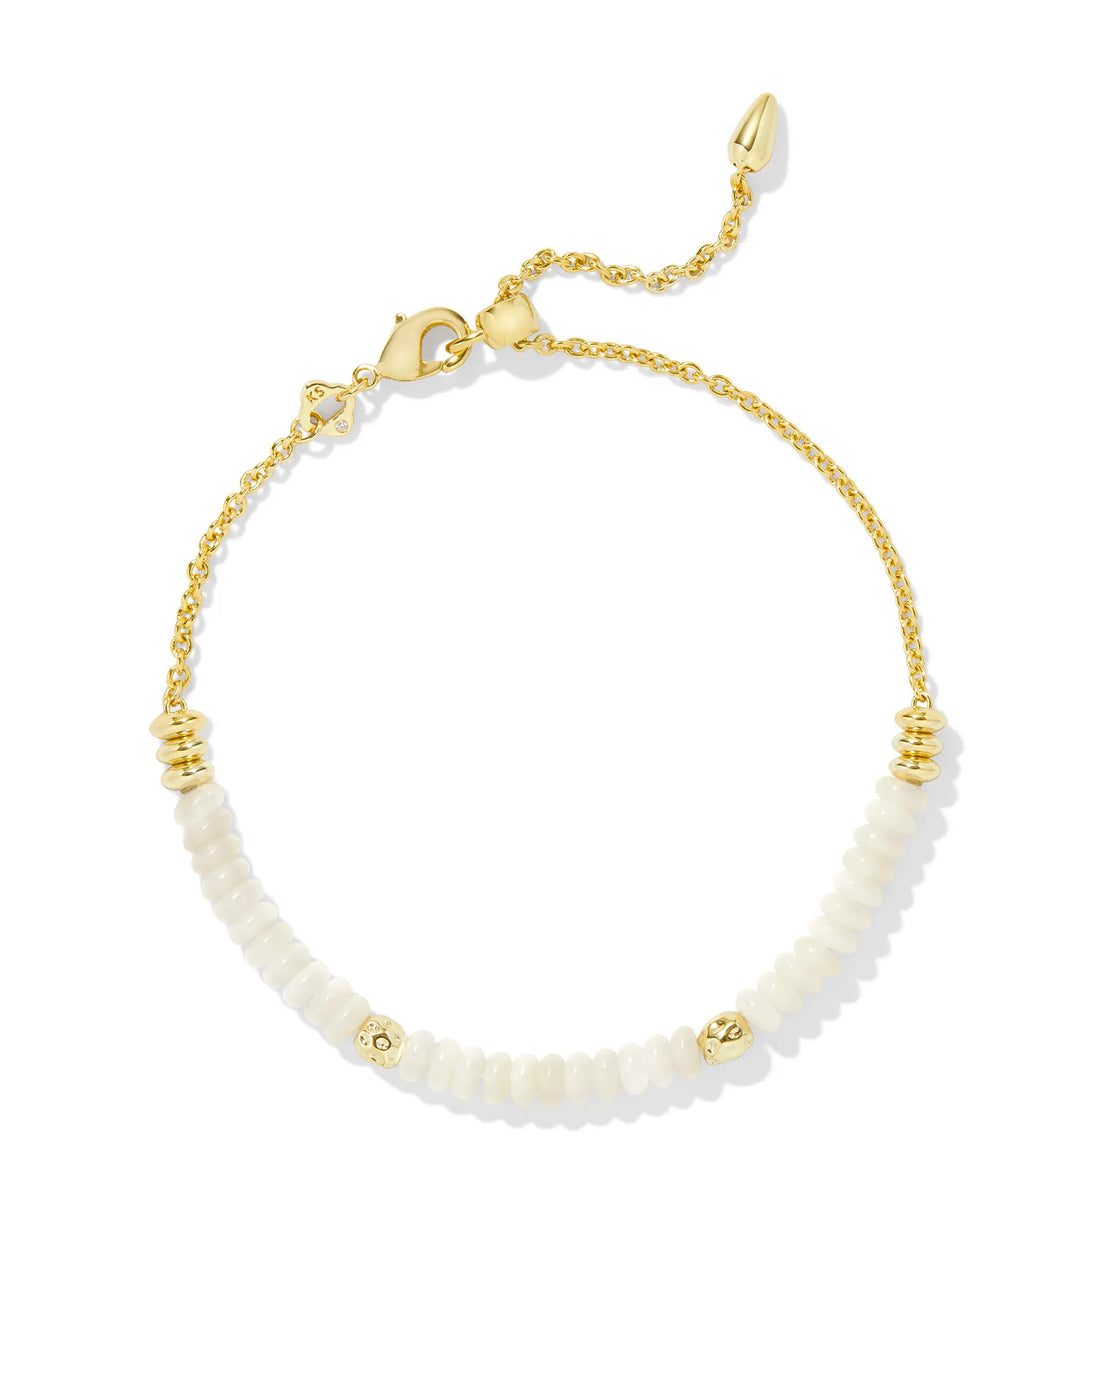 Deliah Delicate Chain Bracelet - Gold Ivory Mother of Pearl